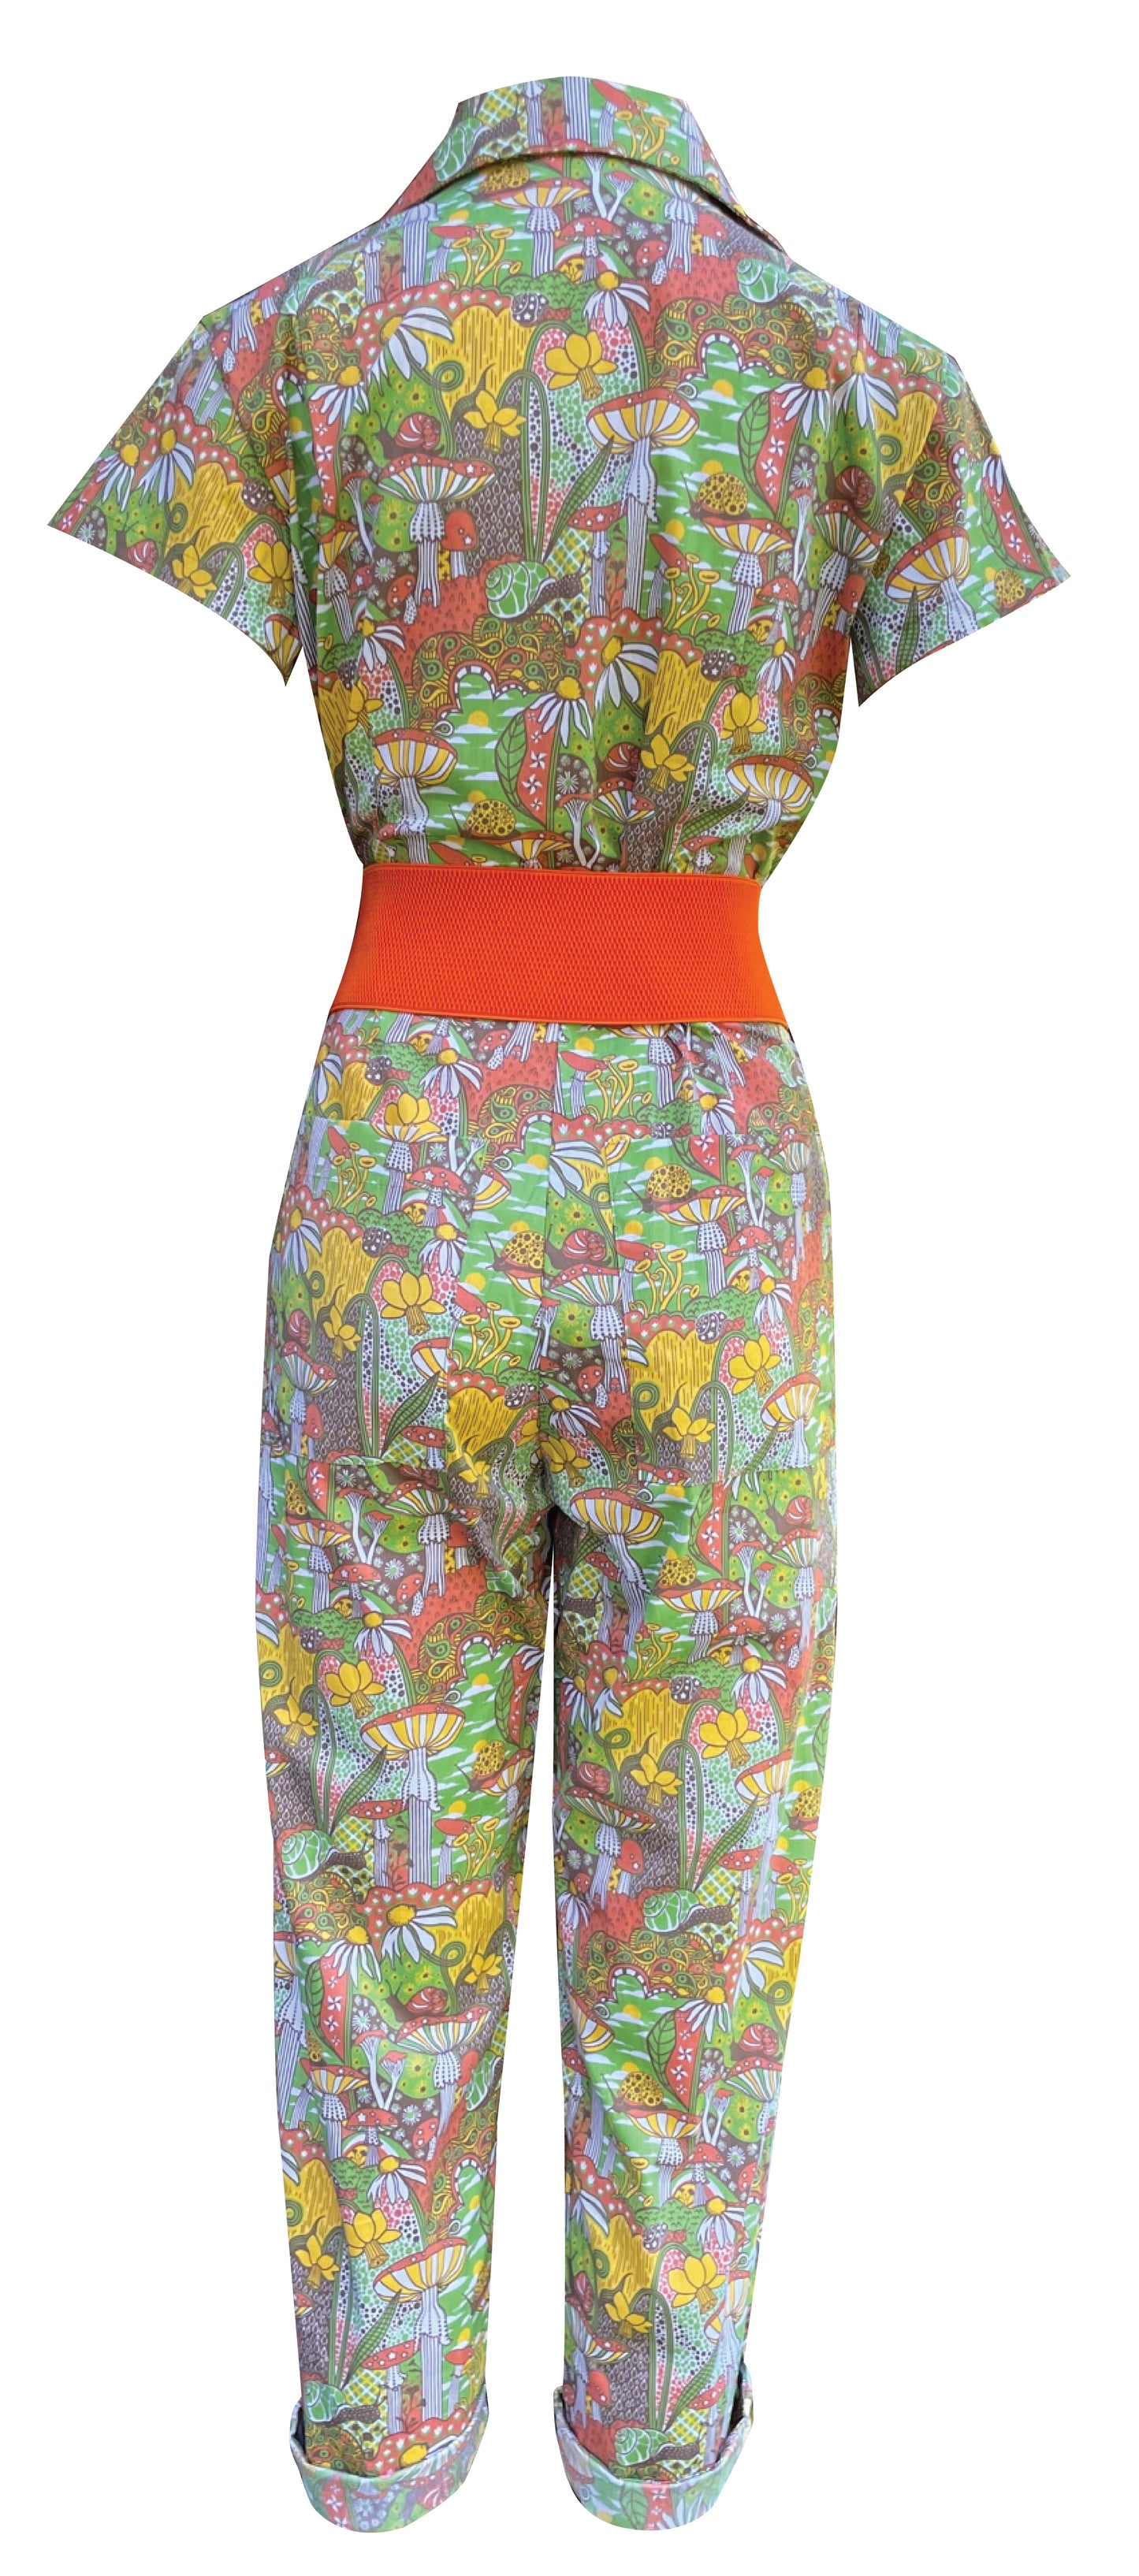 Back view of olive green, orange and yellow mushroom, snail and flower print jumpsuit with big zipper and pockets with orange belt